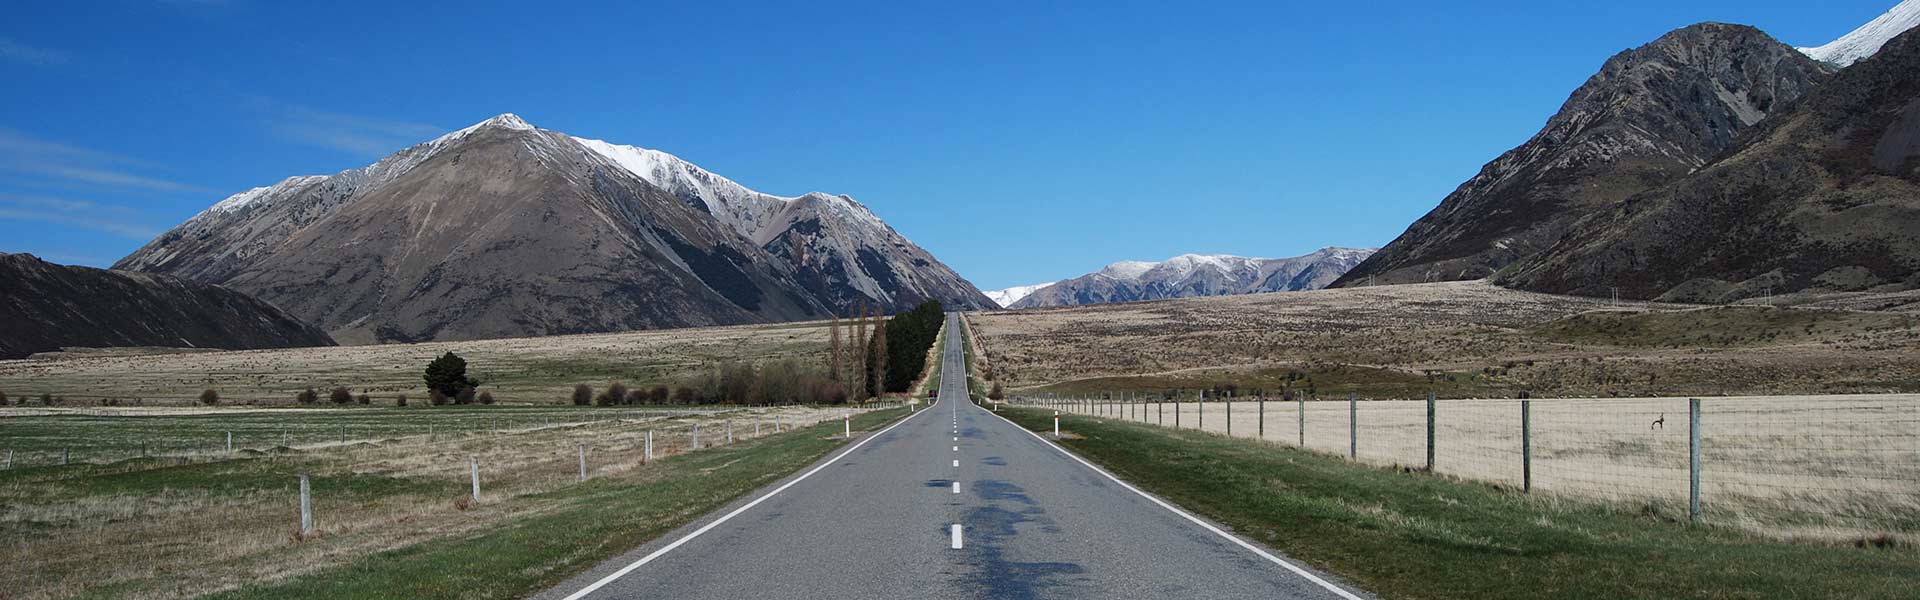 Stunning driving road in New Zealand Image Credit: Tourism New Zealand